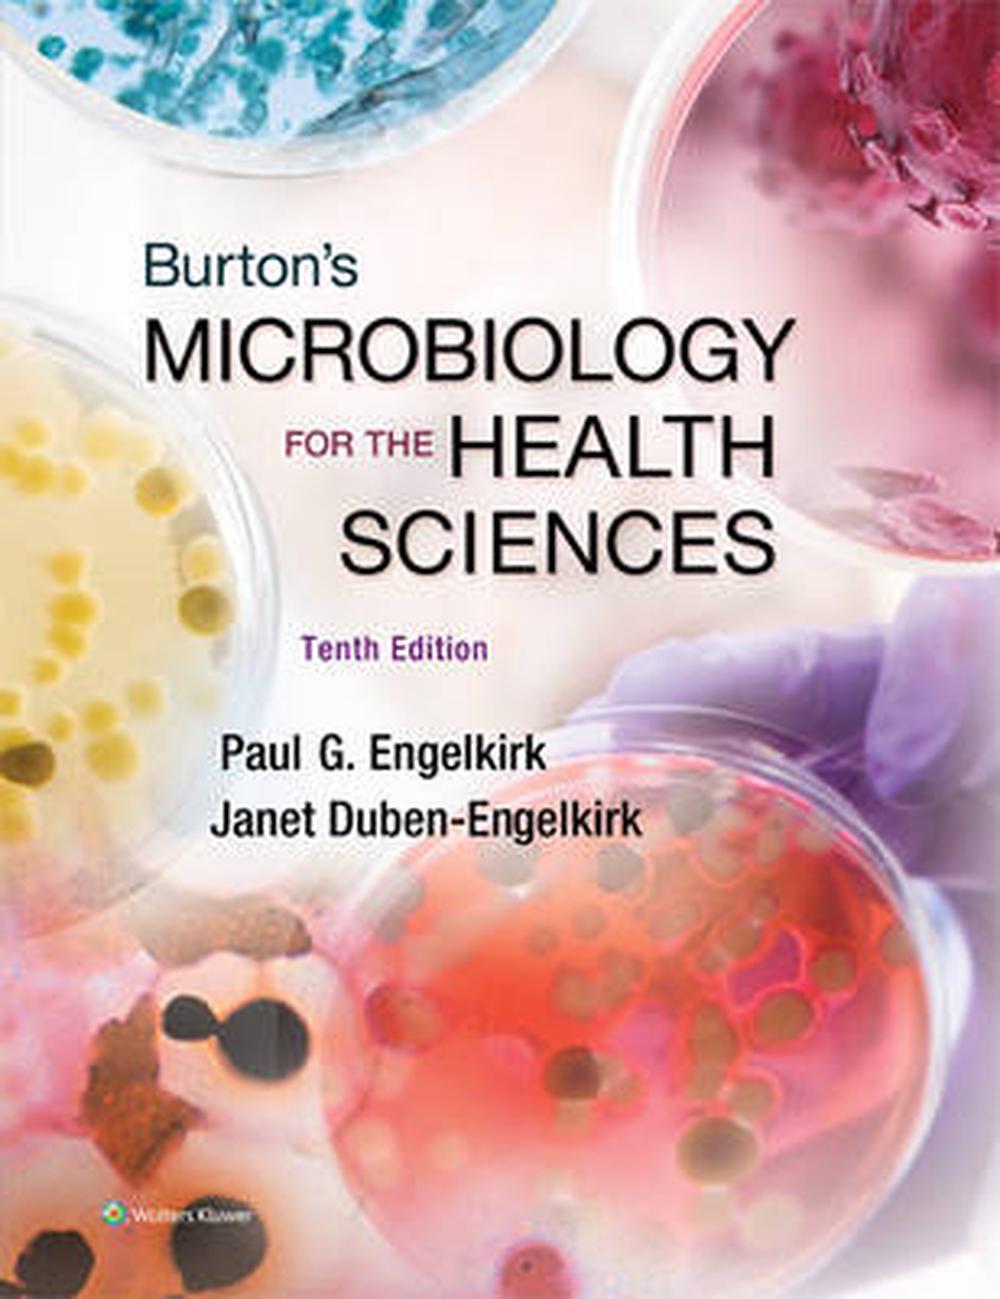 Image result for burton's microbiology for the health sciences 10th edition